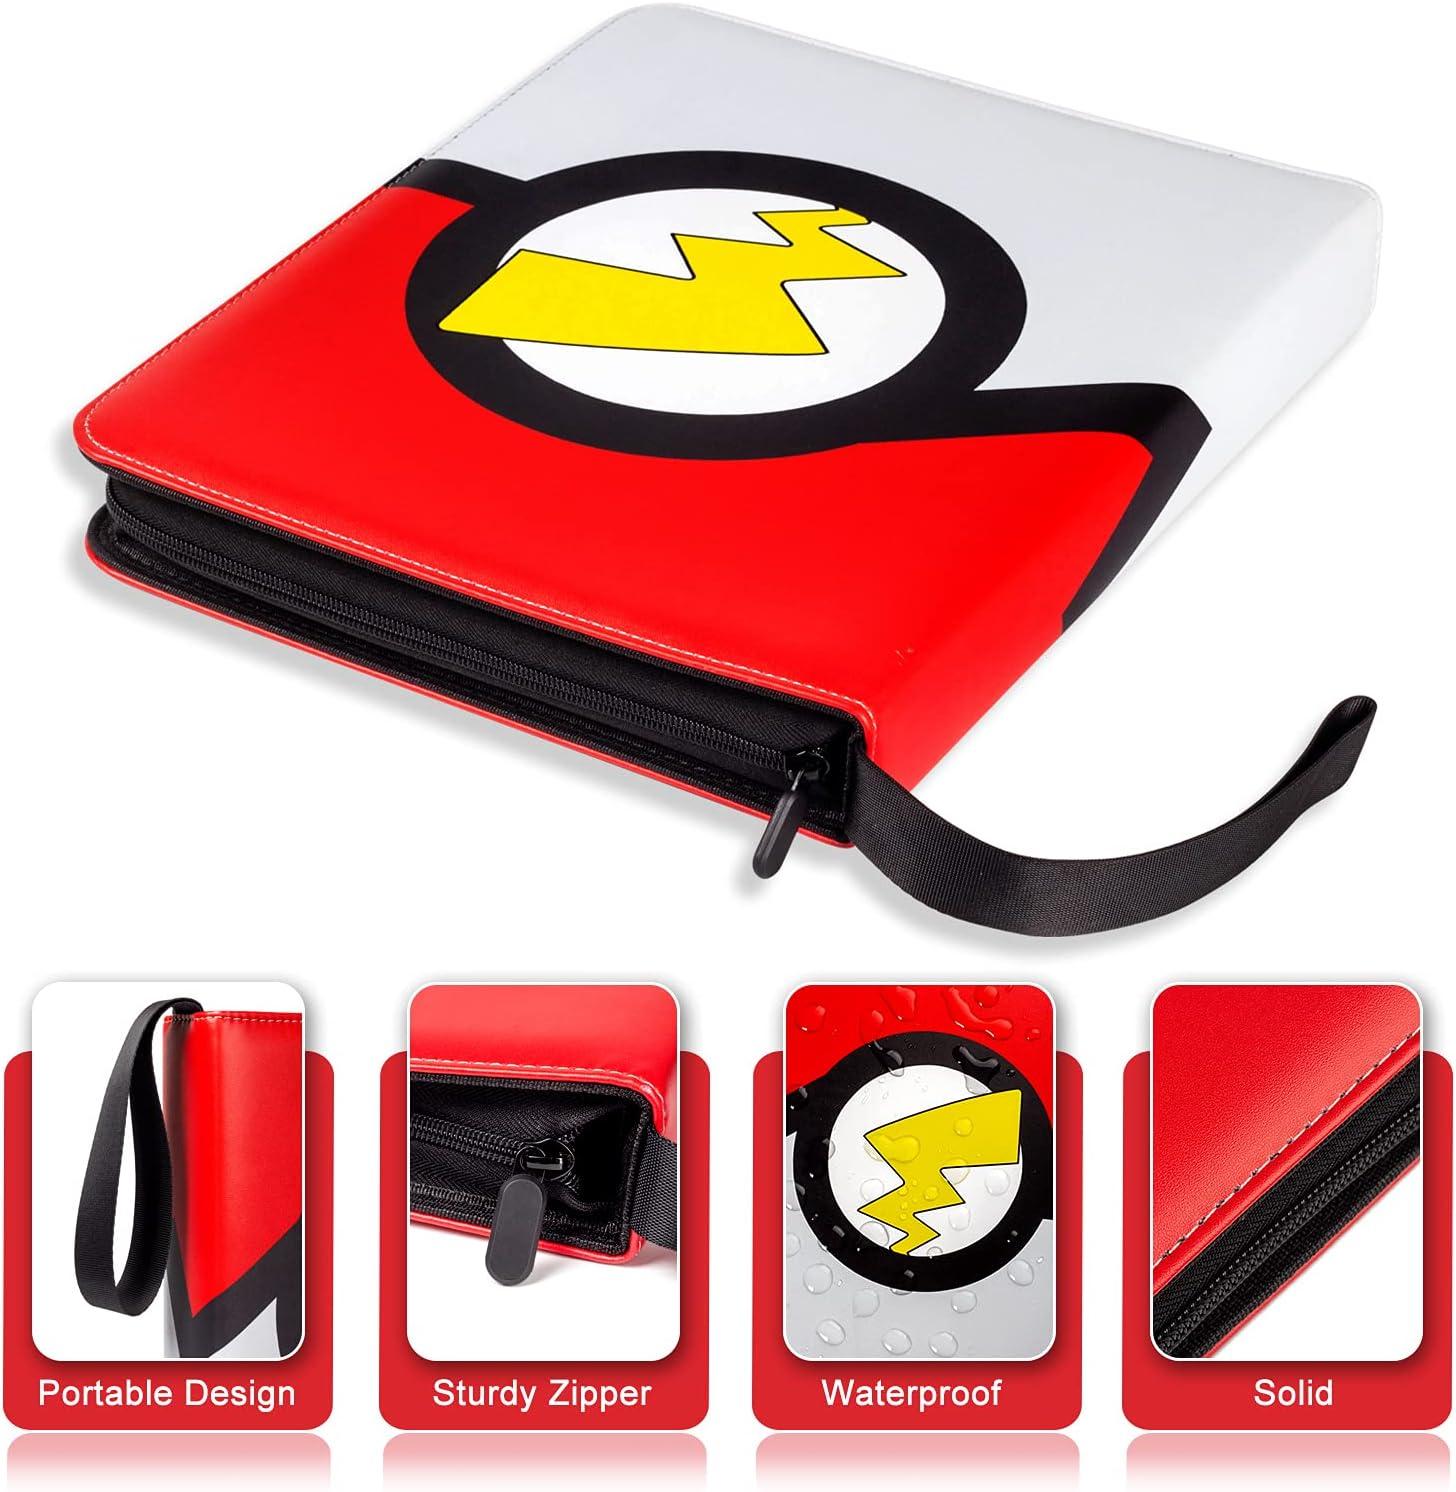  4-Pocket Binder for Pokemon Cards, Pokemon Card Binder with 50  Removable Sheets Holds 400 Cards, Trading Card Binder for TCG Football  Baseball Pokemon Card Holder-Toys Gifts for Boys Girls : Toys